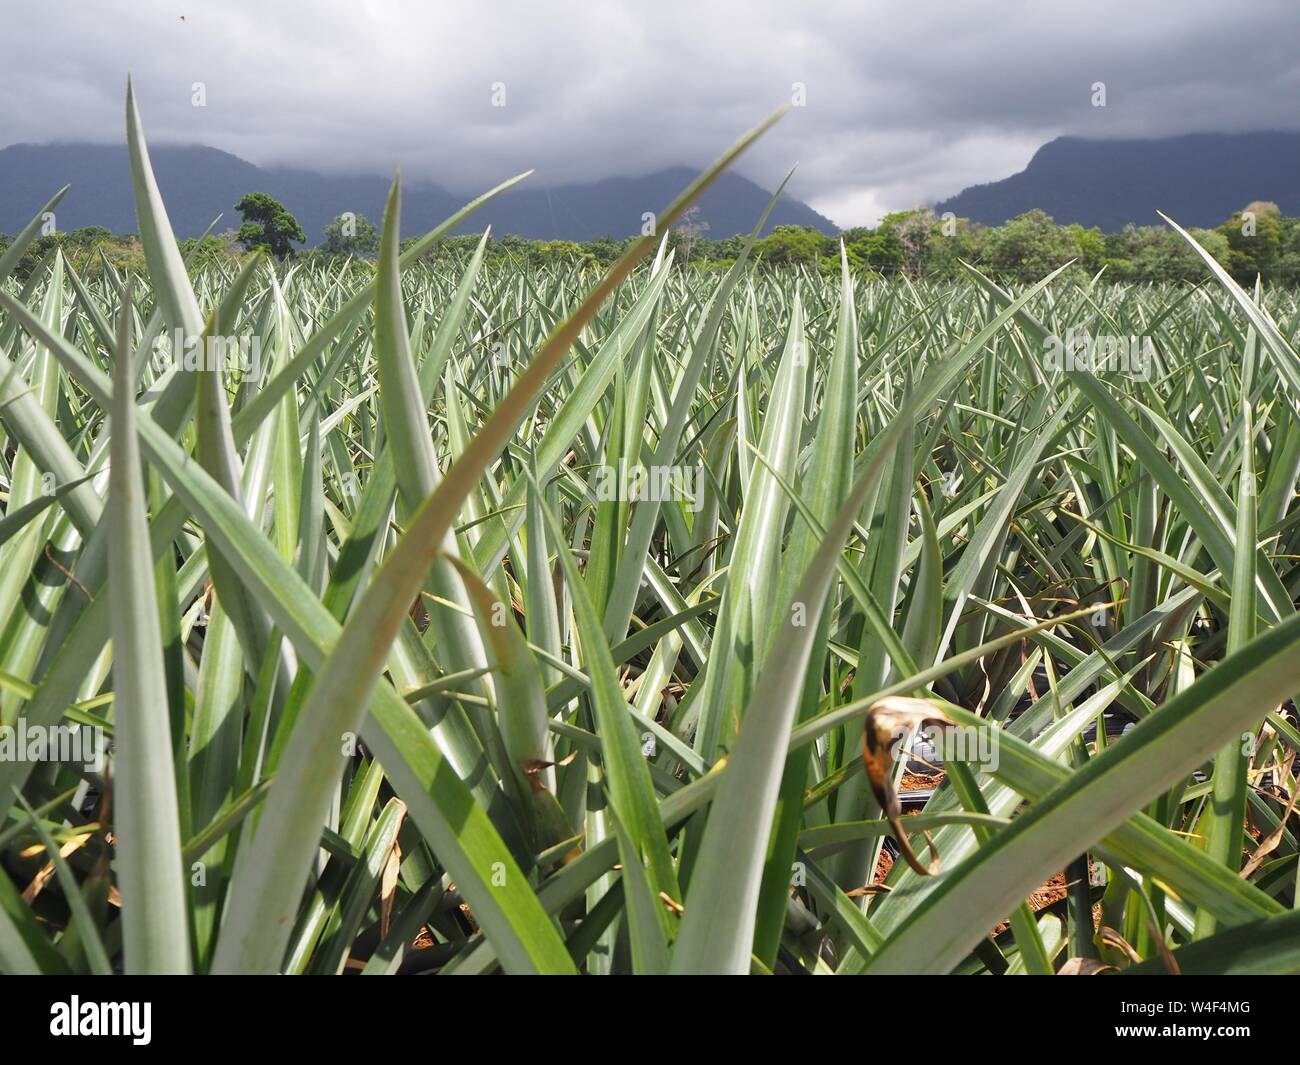 Pineapples growing in a field in Honduras for Dole / Standard Fruit. Industrial fruit production for canning and juice. Stock Photo